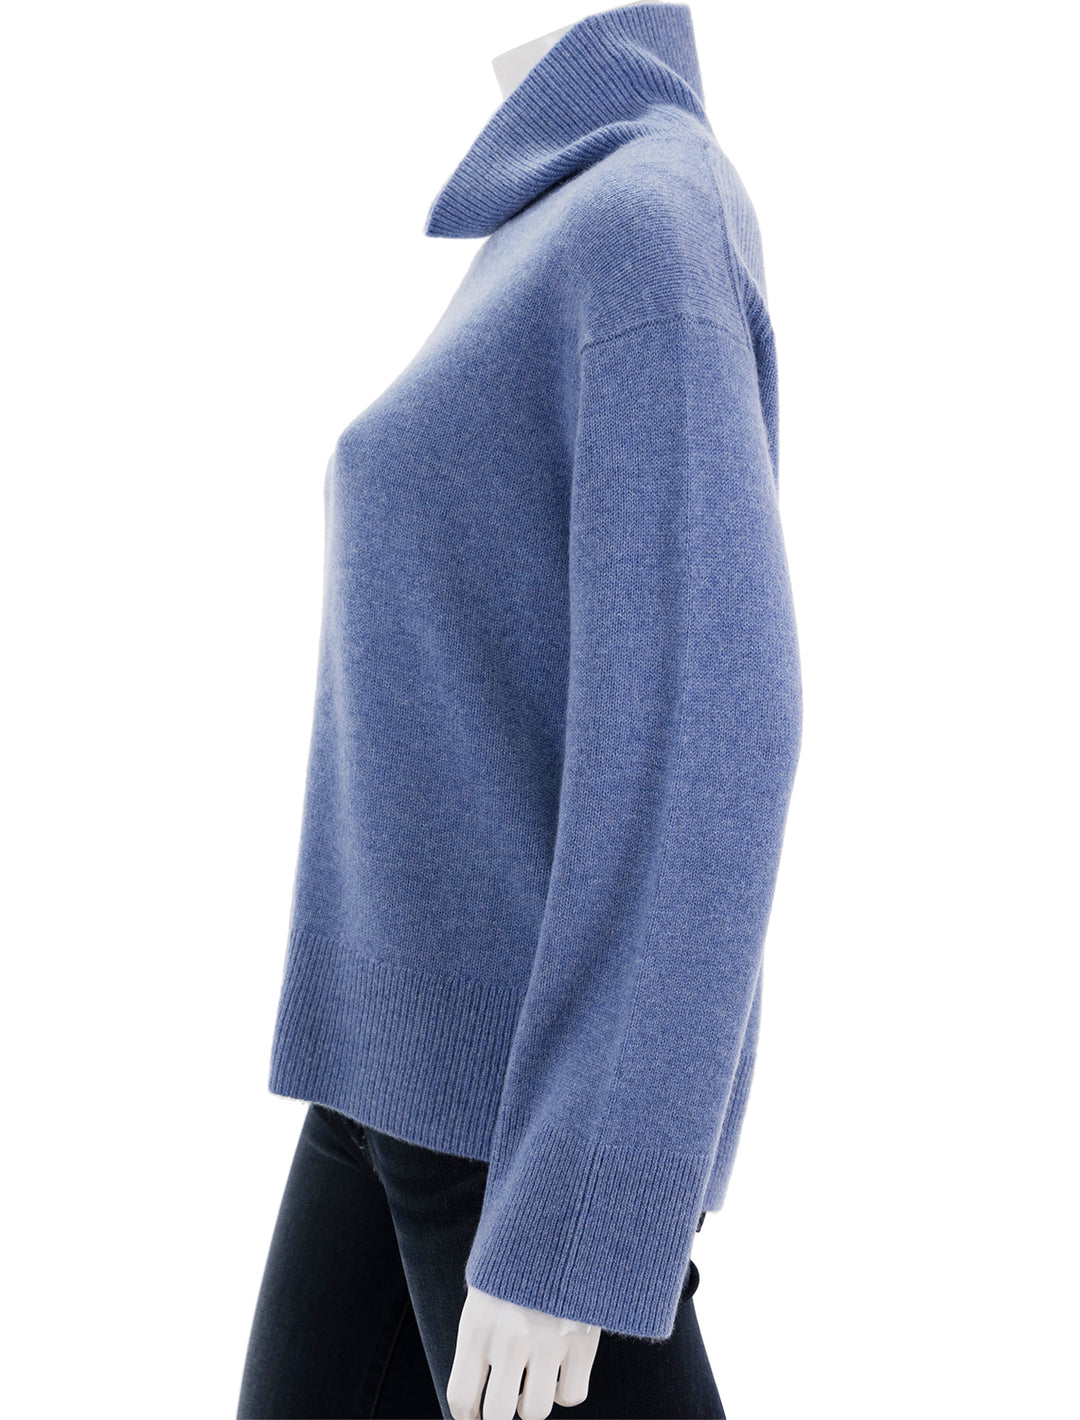 ATM Anthony Thomas Melillo | Recycled Cashmere Turtleneck Sweater - Heather Charcoal | S | Heather Charcoal